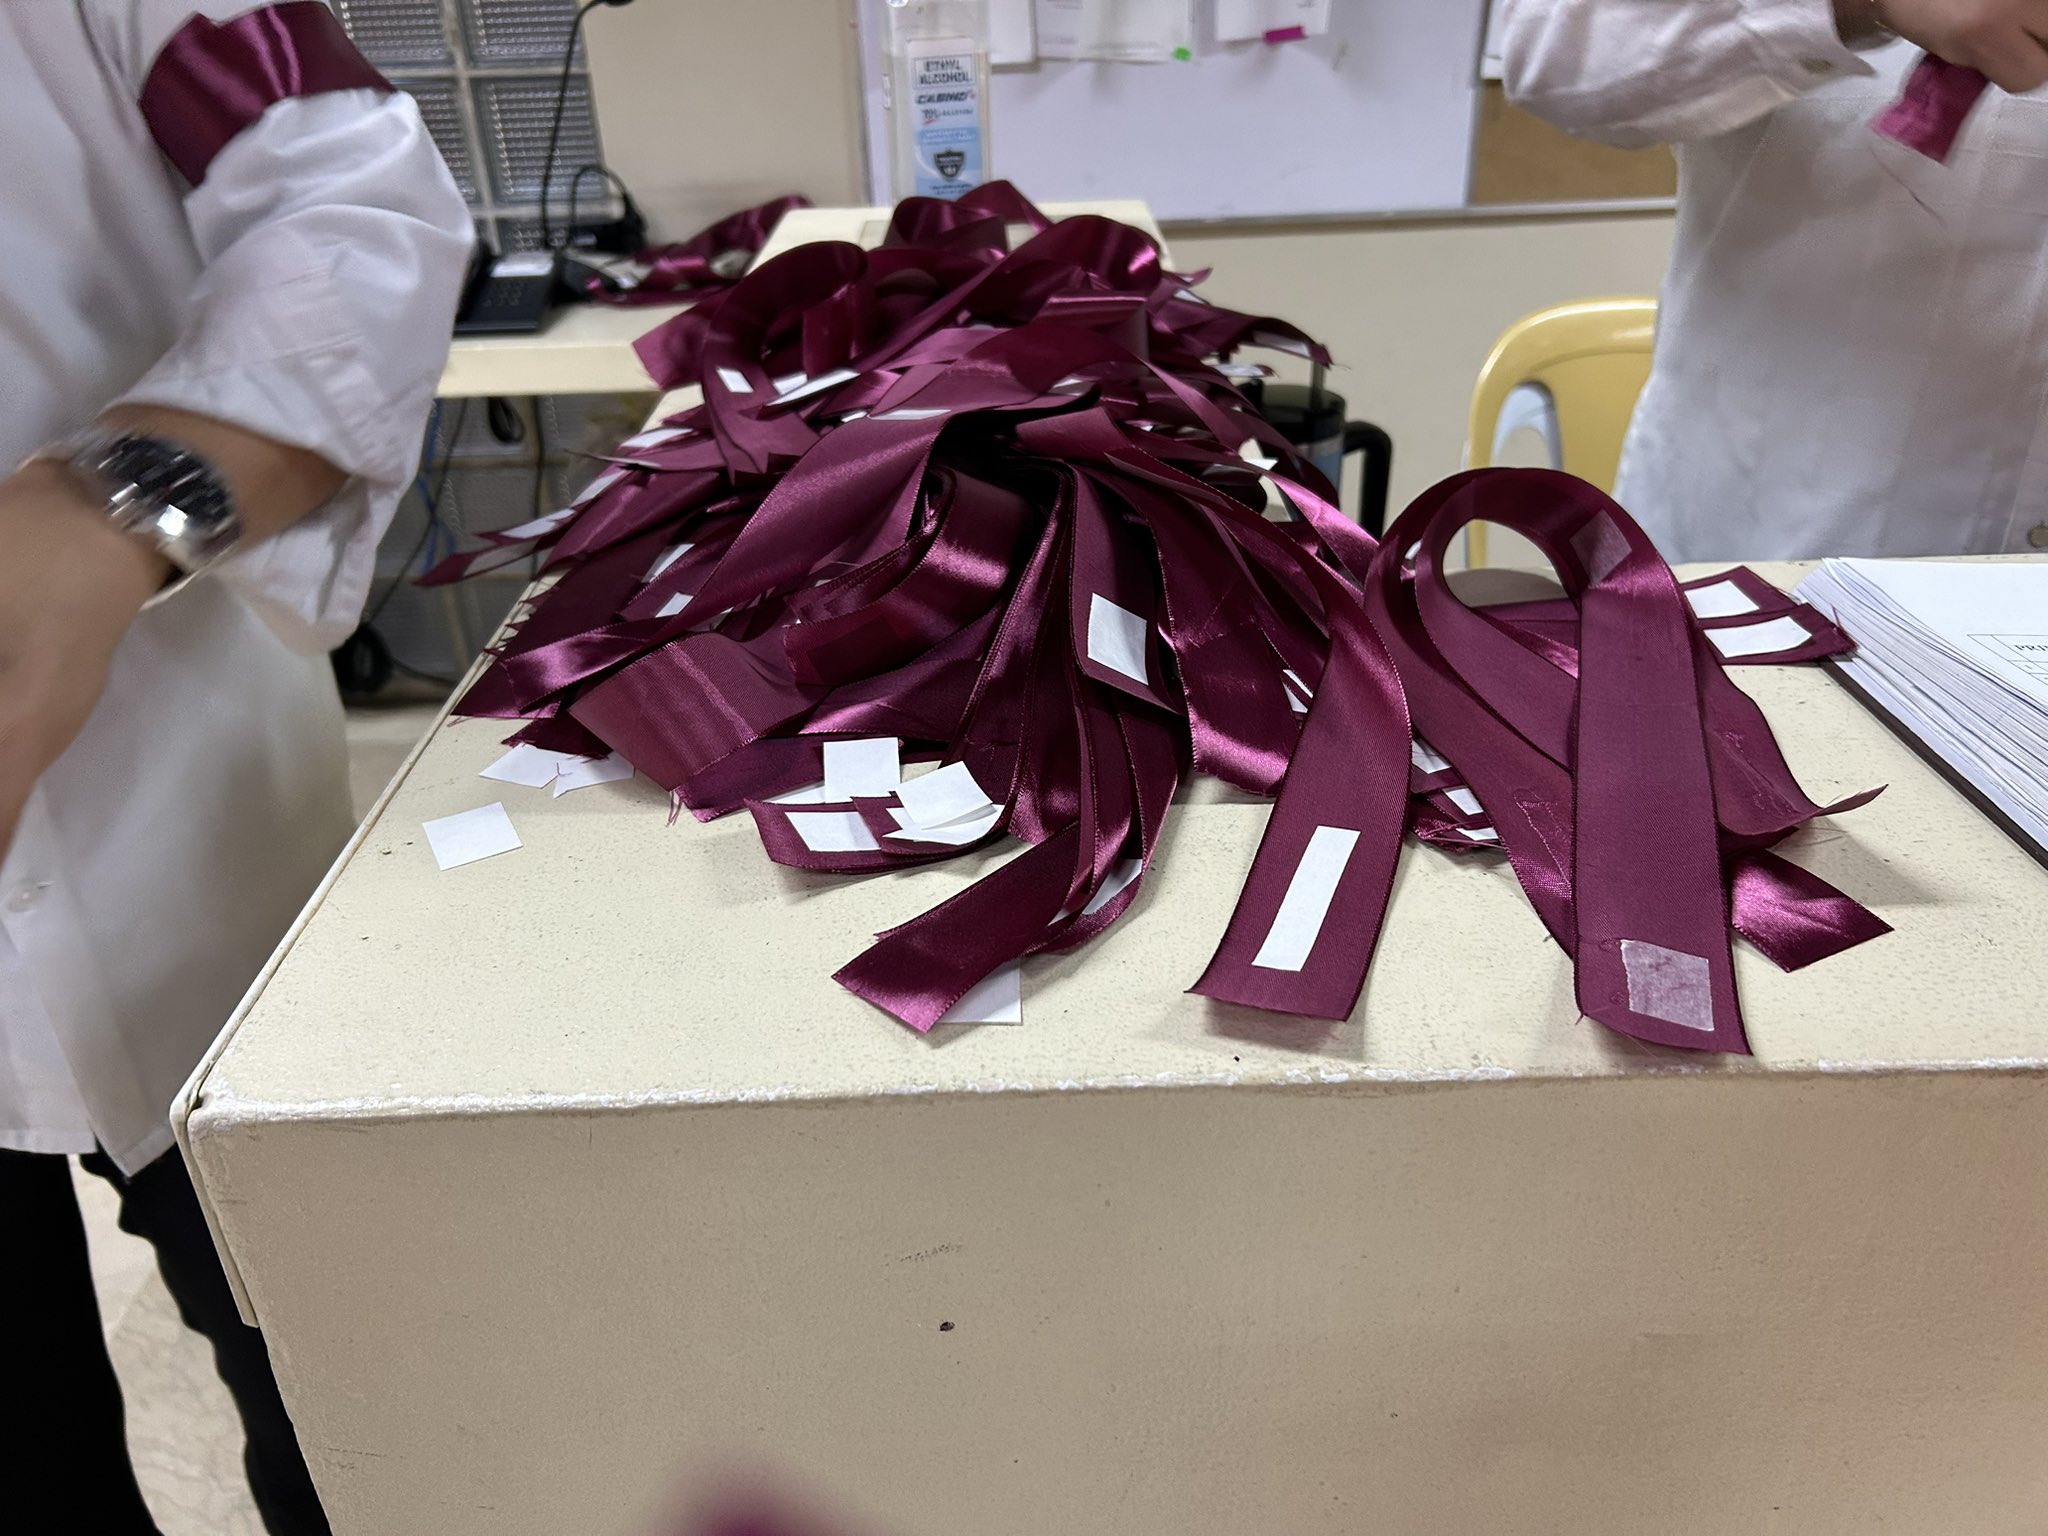 A pile of ribbons handed out by Senate External Affairs and Relations staff at the building’s entrance. INQUIRER.net / Charie Abarca